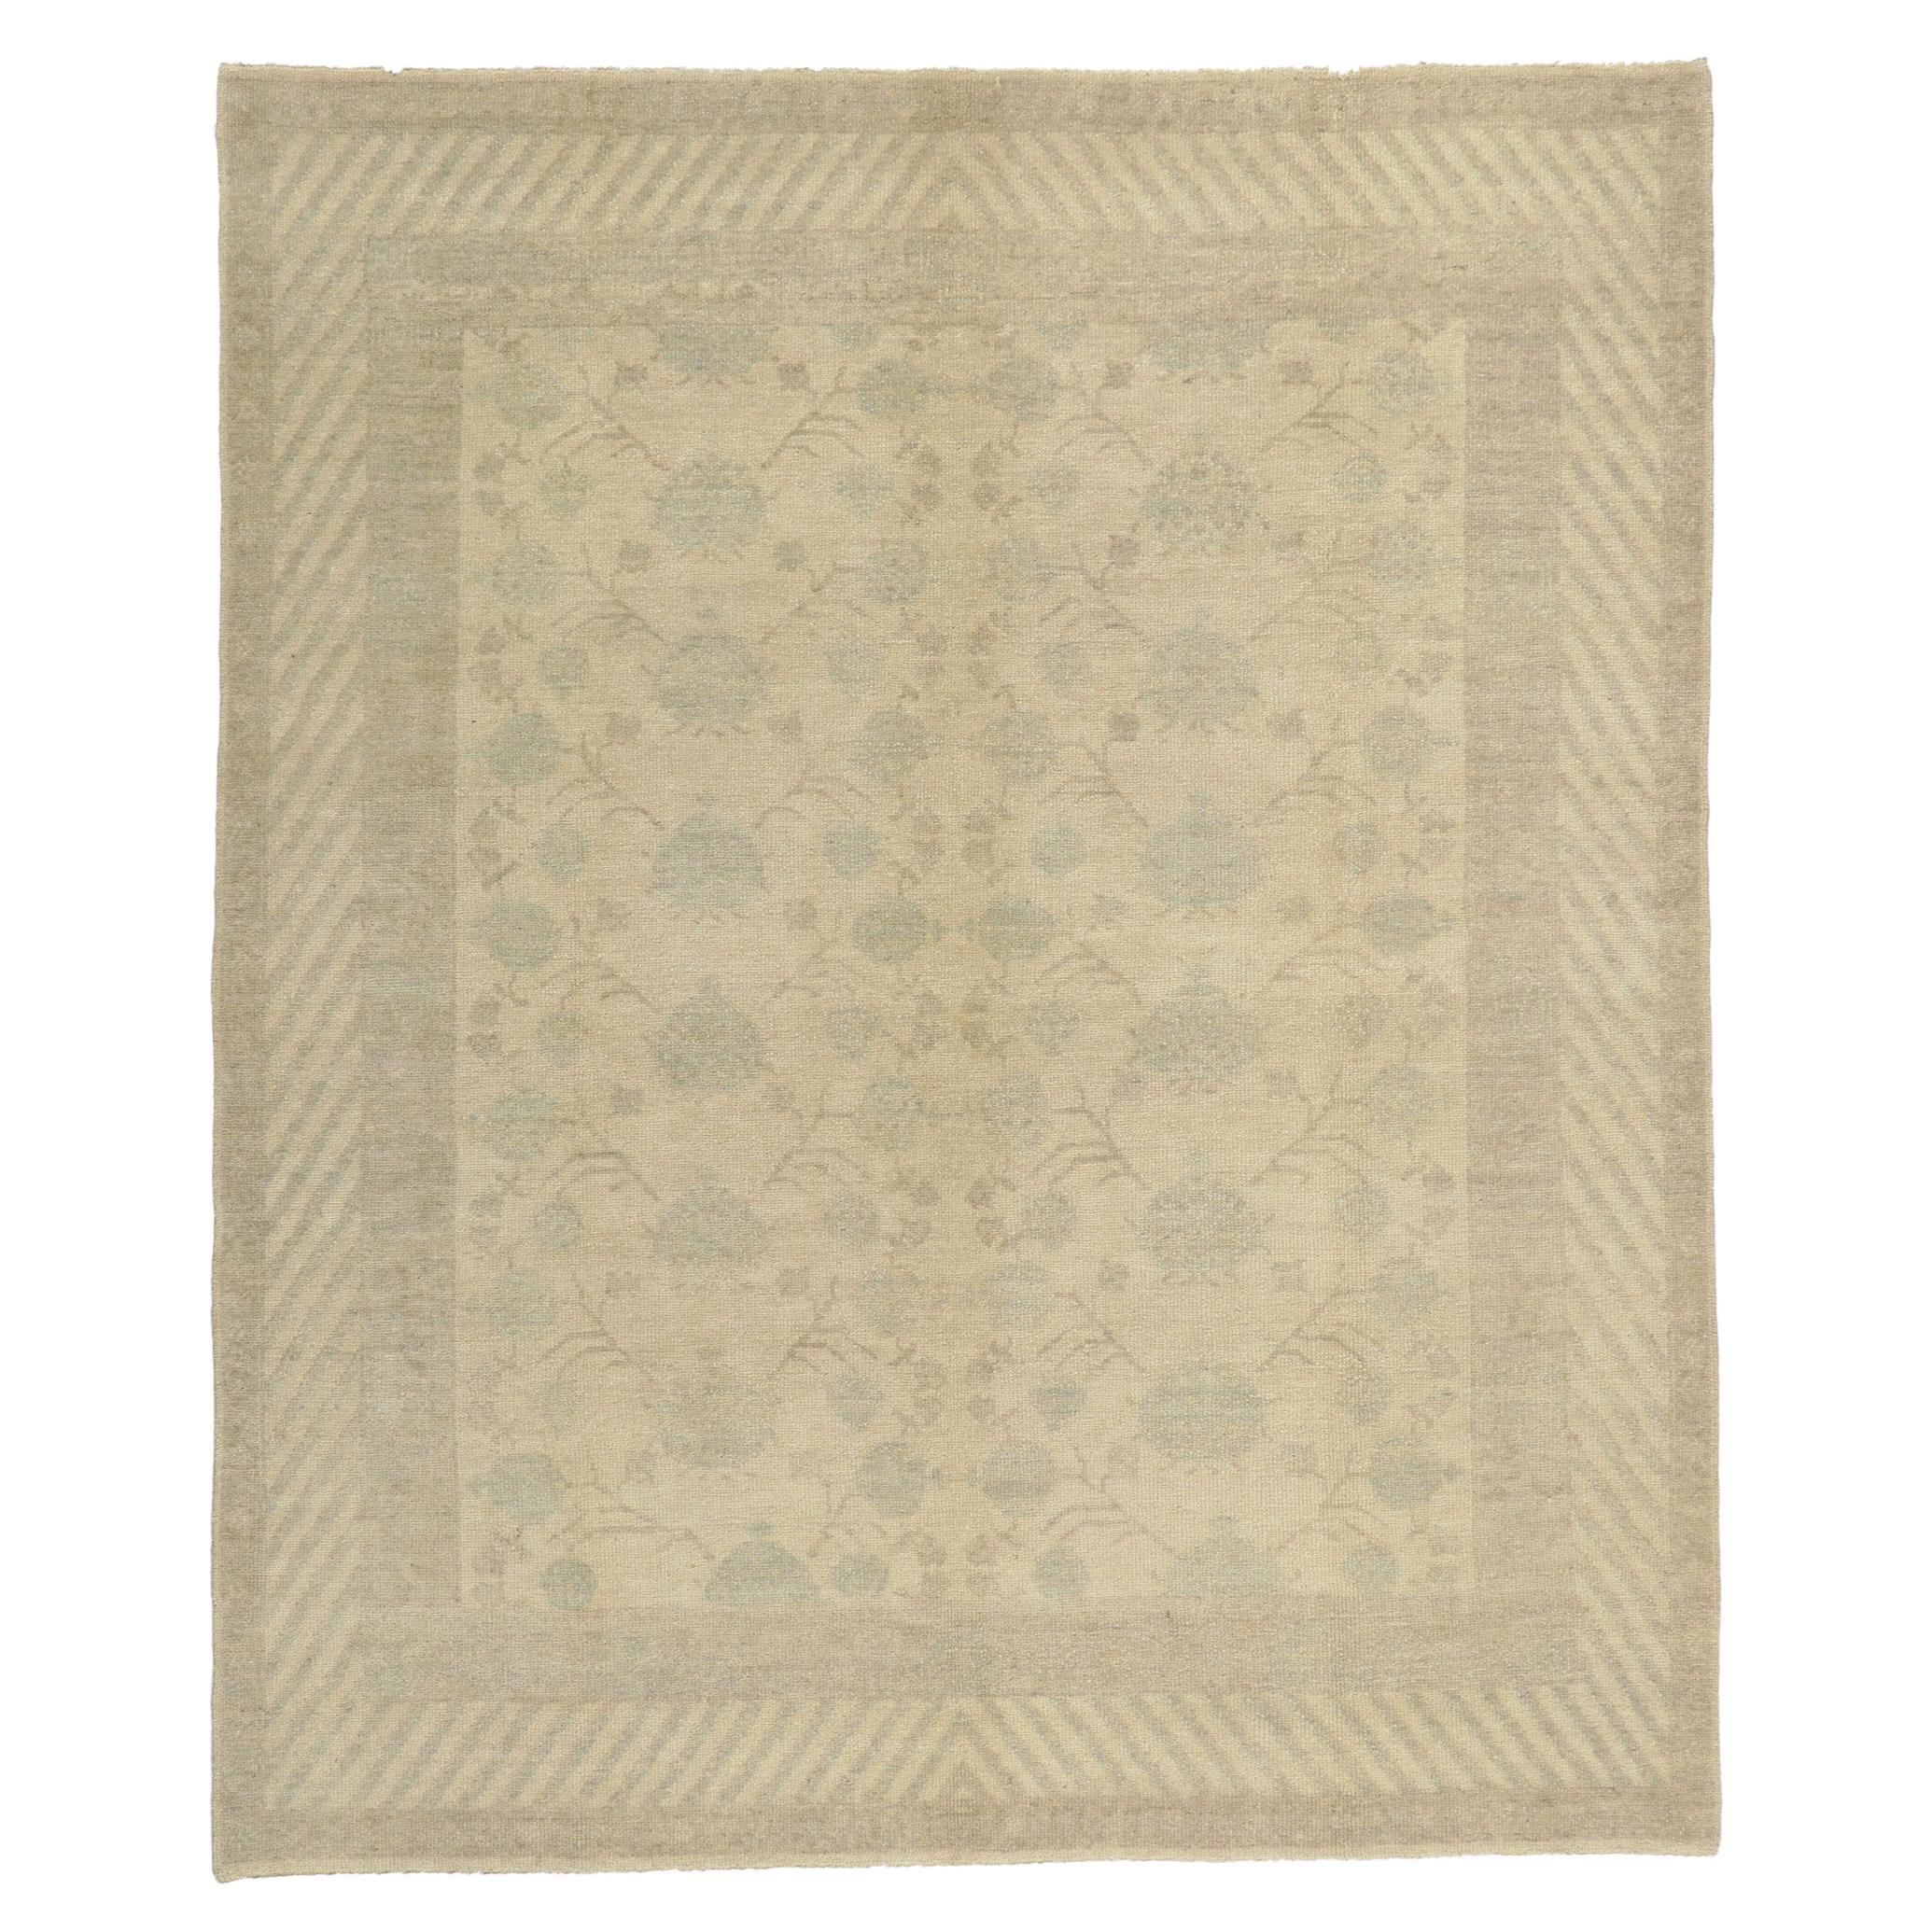 New Transitional Khotan Rug with Soft Earth-Tone Colors